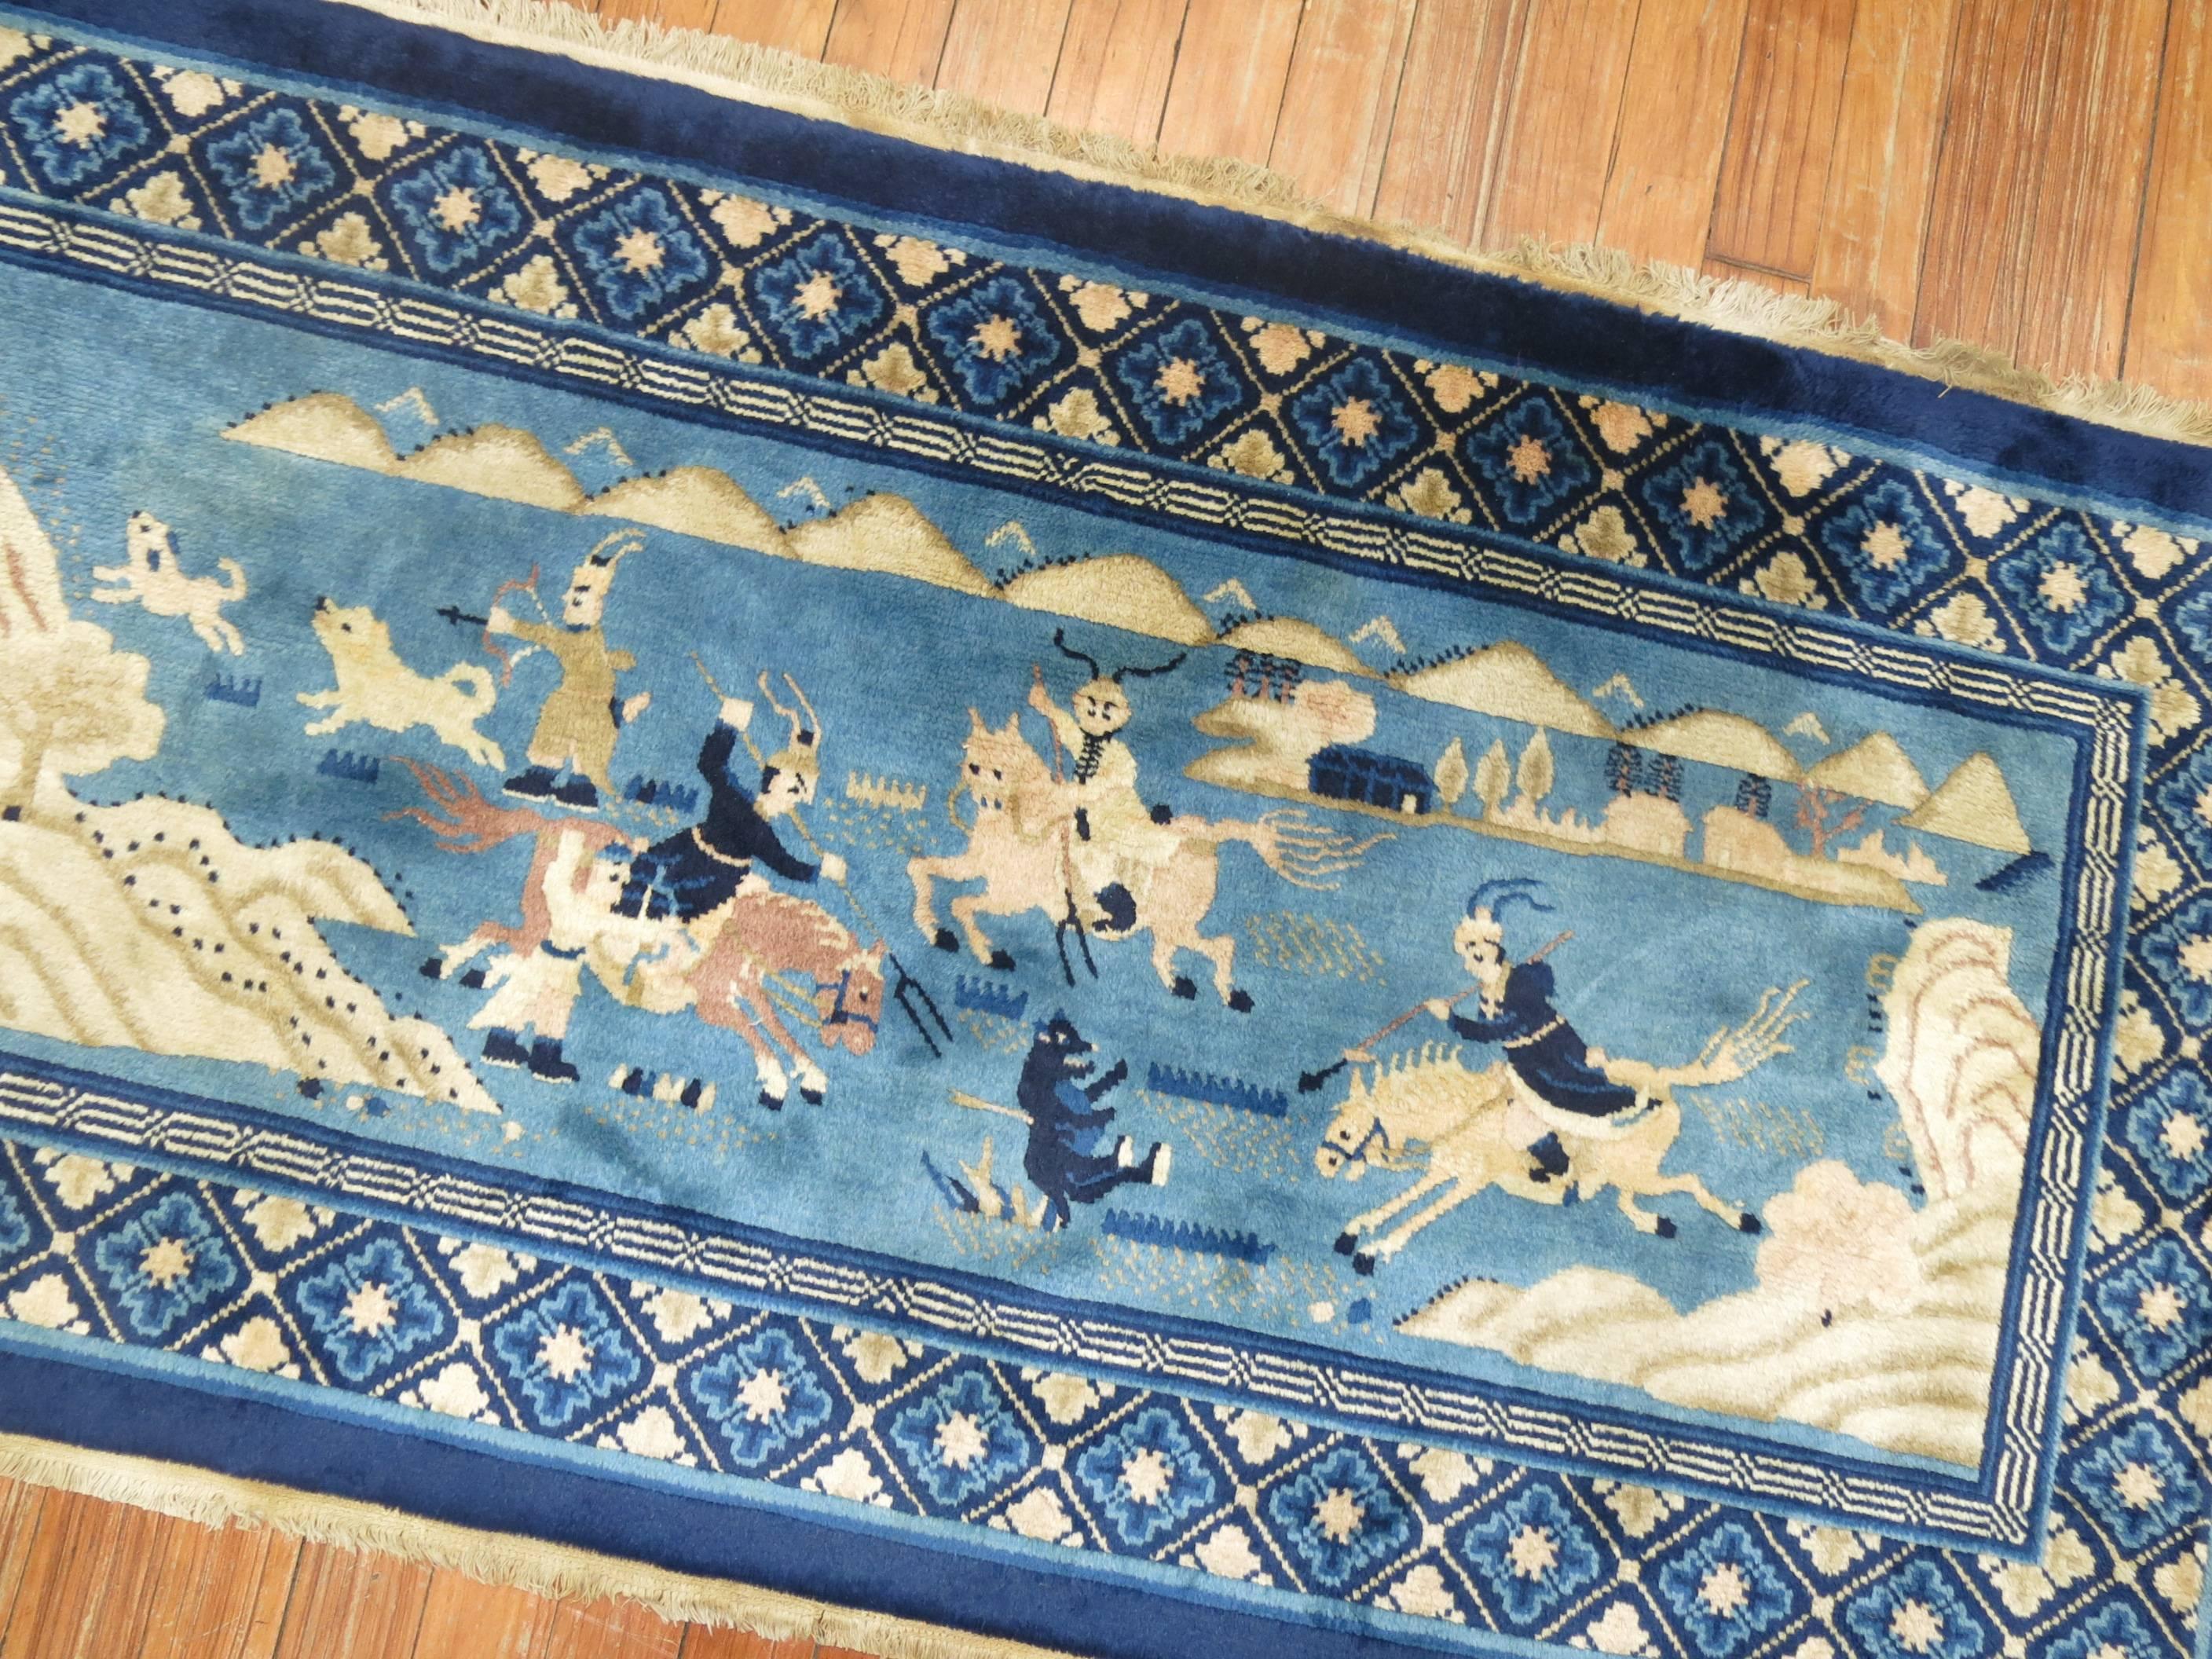 A 20th century Chinese Pictorial Hunting scene rug in vivid blues.